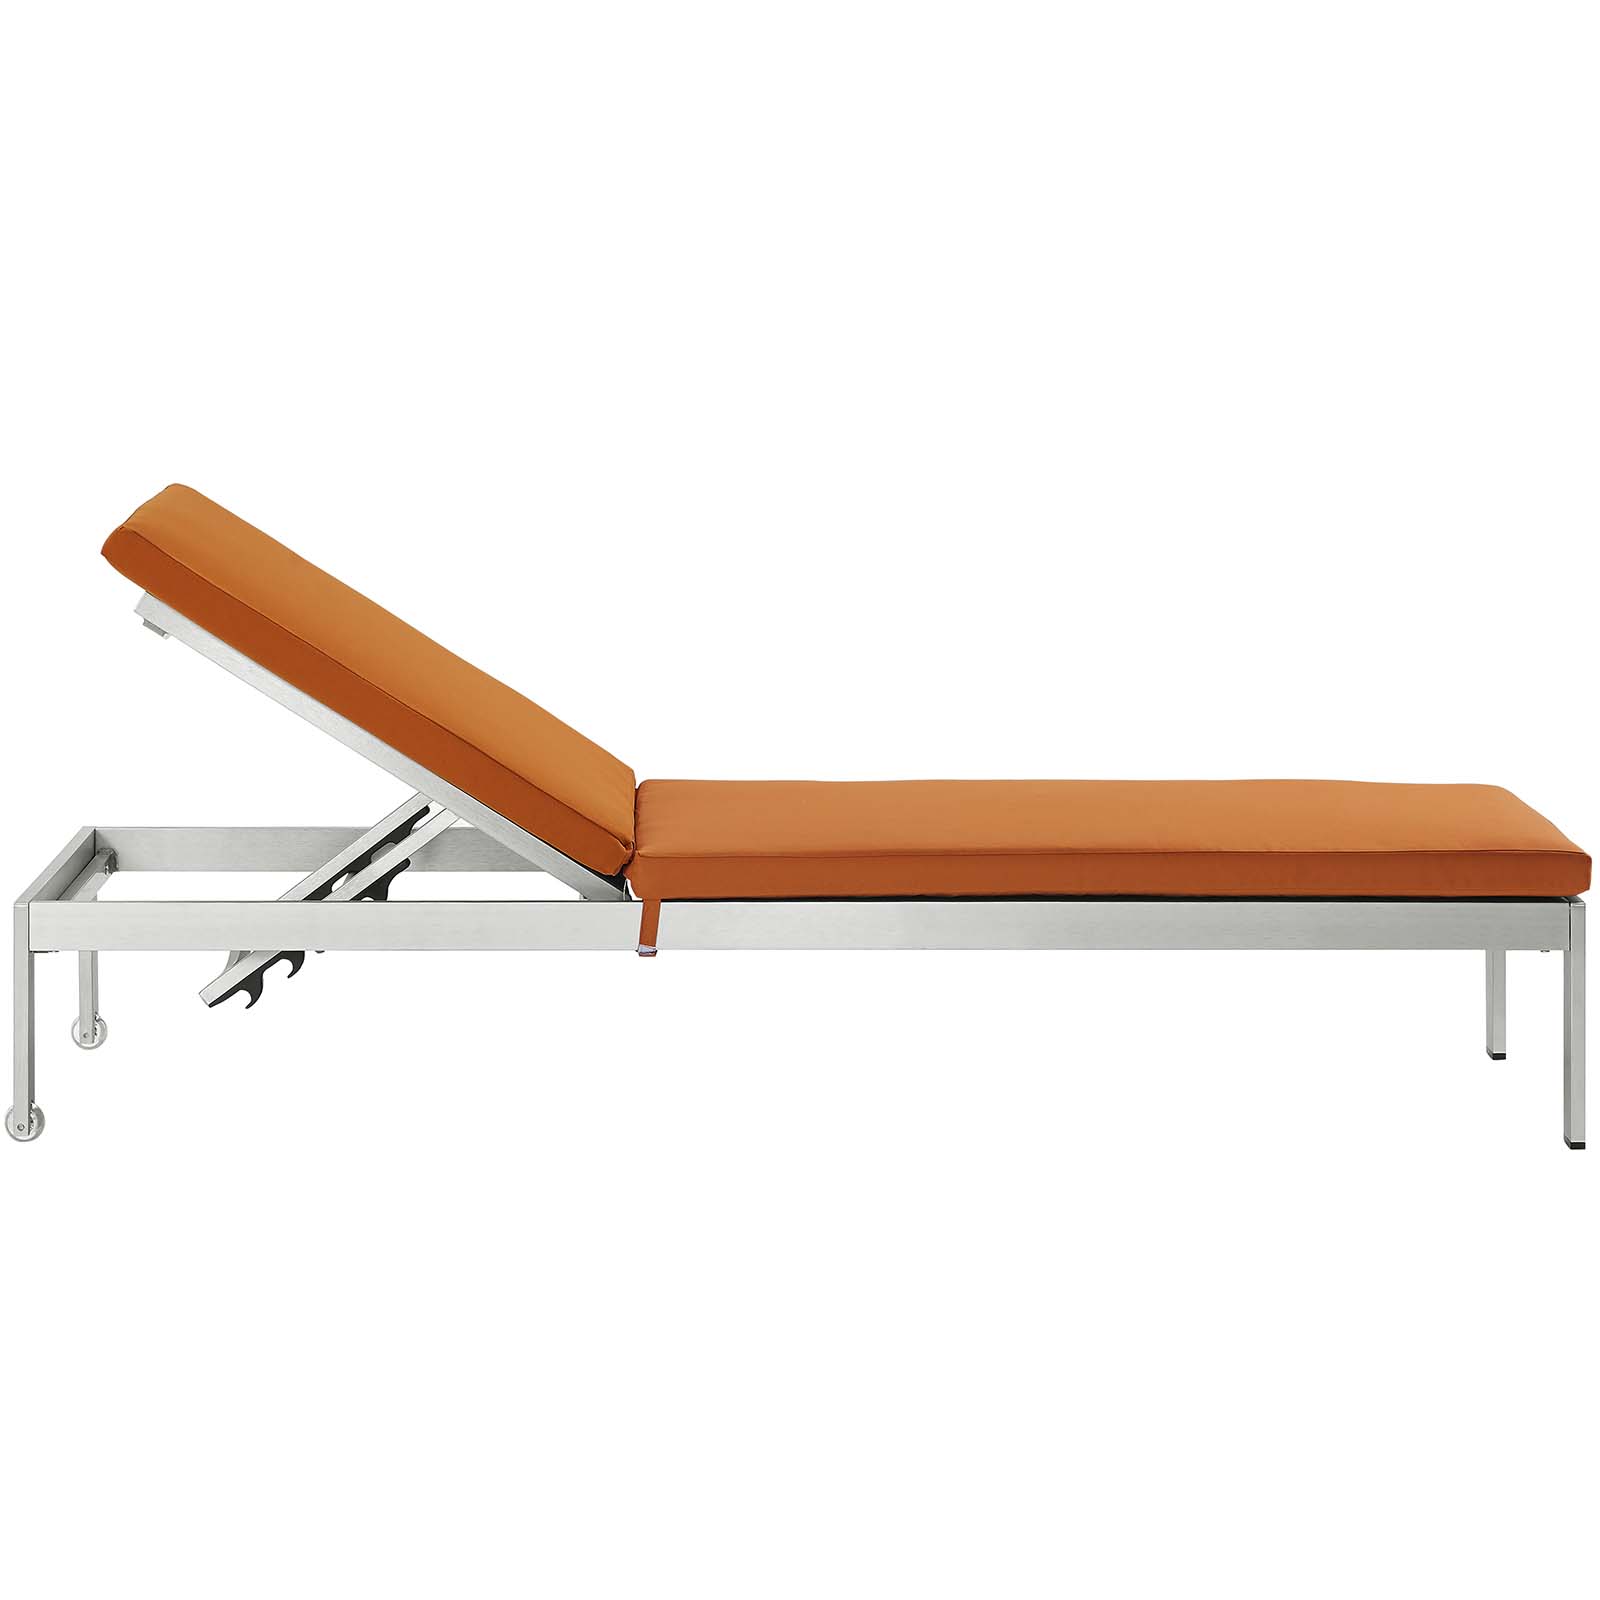 Modern Contemporary Urban Design Outdoor Patio Balcony Chaise Lounge Chair ( Set of 4), Orange, Aluminum - image 5 of 6